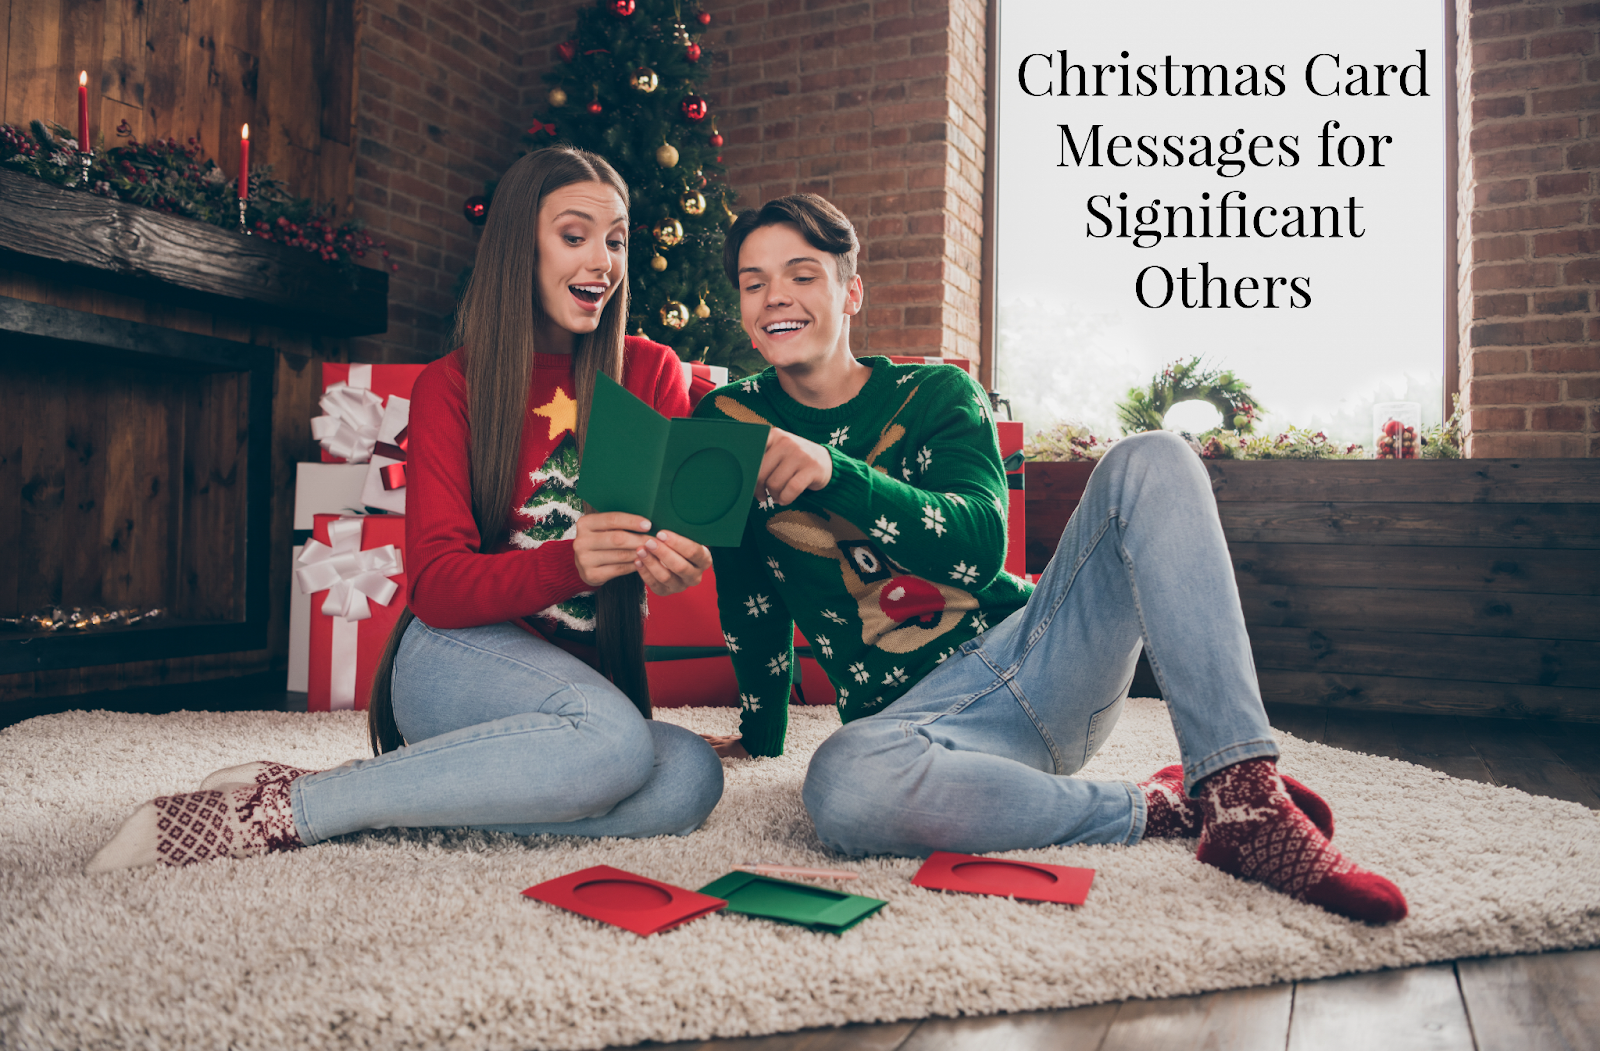 A couple wearing Christmas sweaters looking at a Christmas card together with the text “Christmas card messages for significant others”